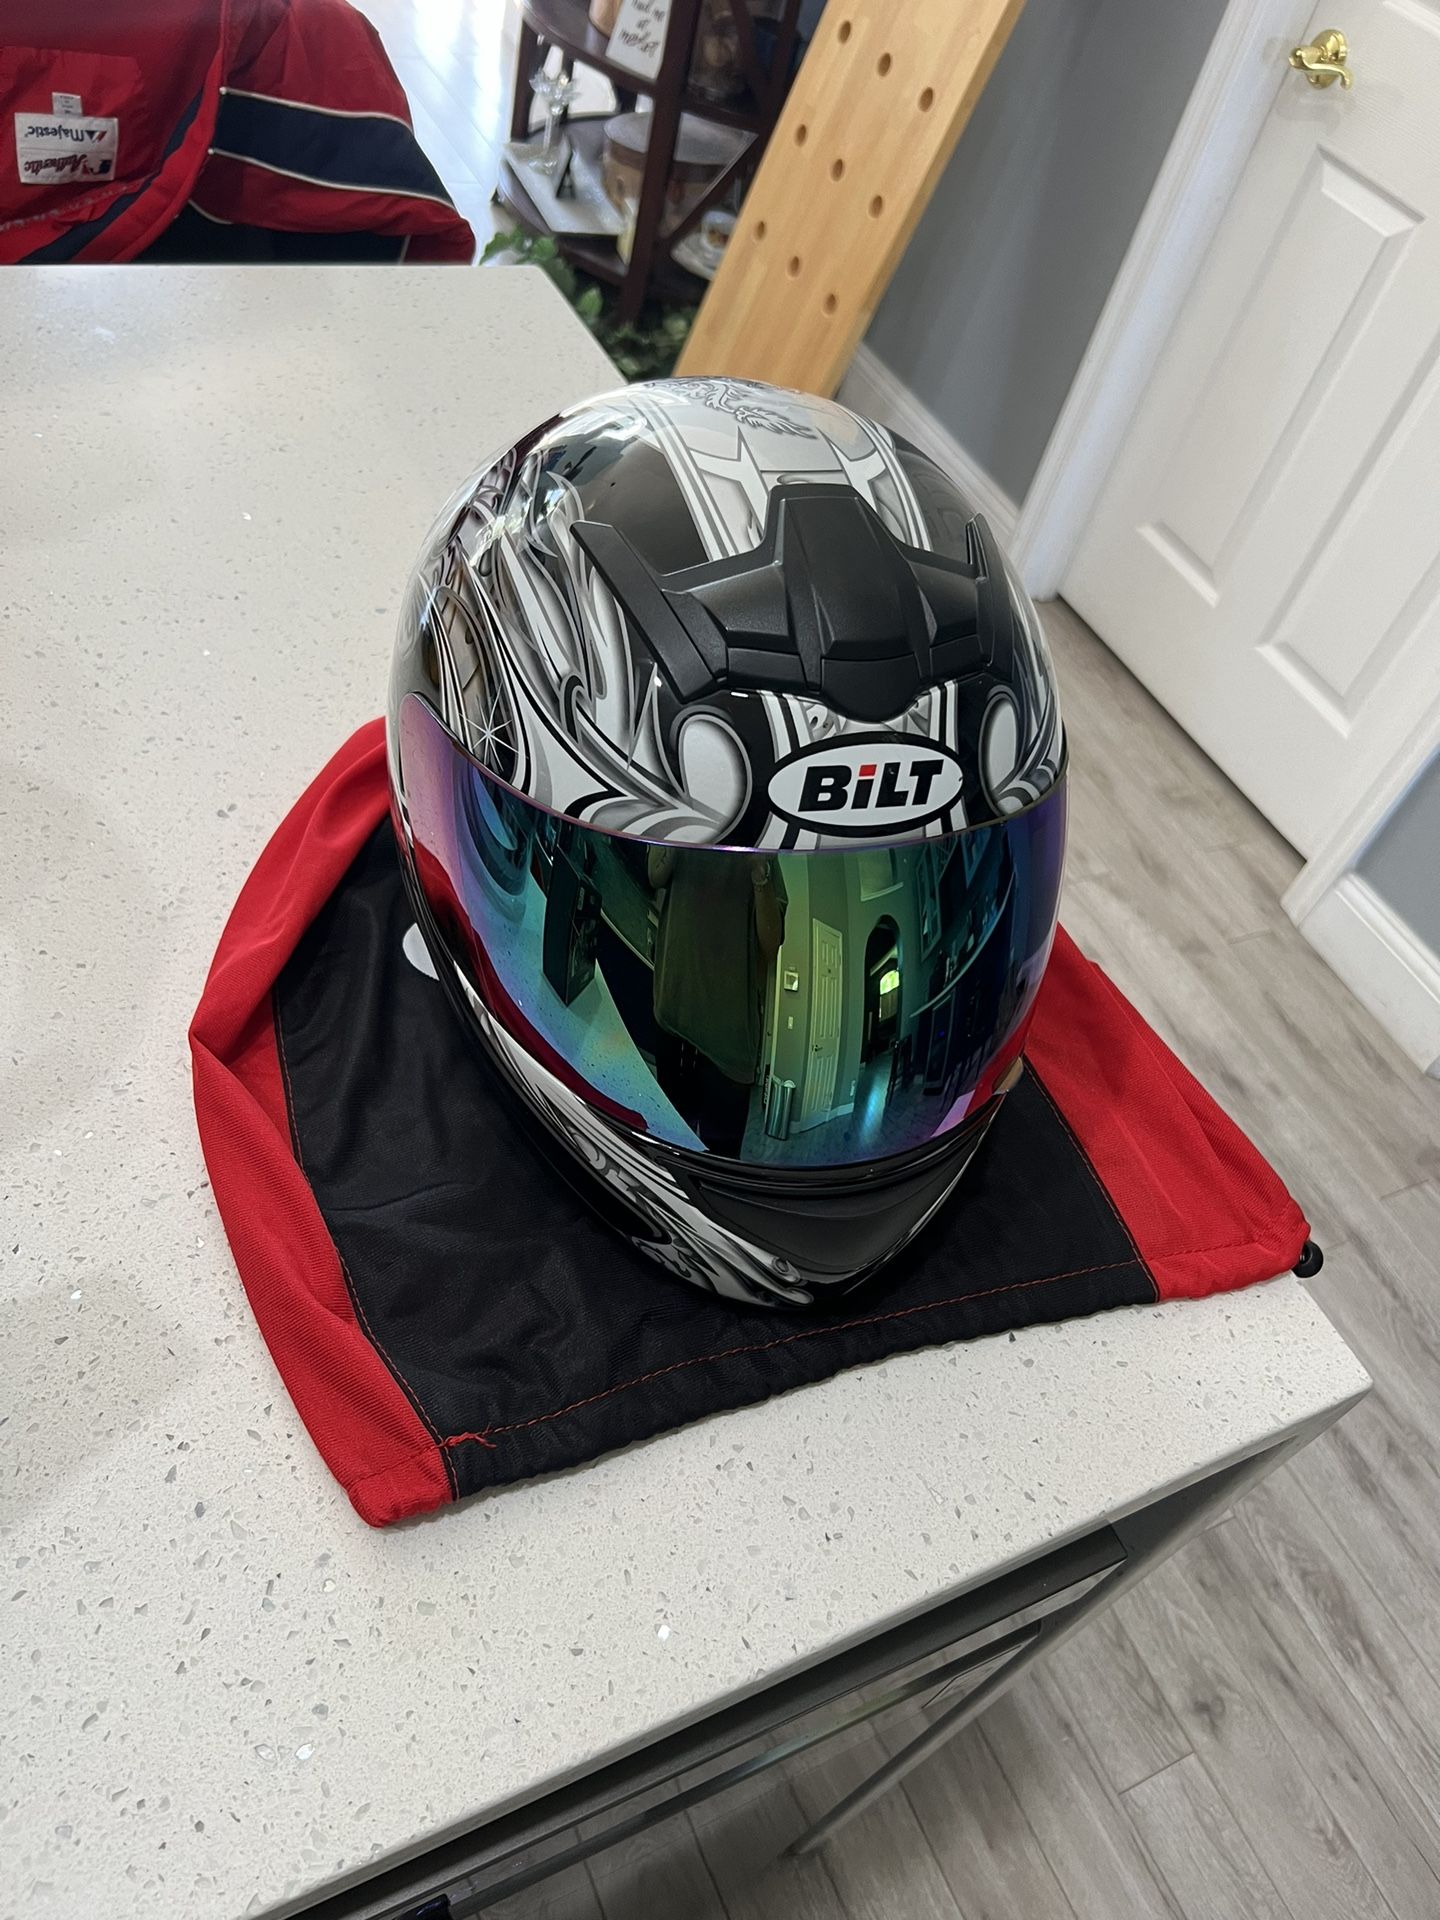 Bilt Motorcycle Helmet Size M with UClear 